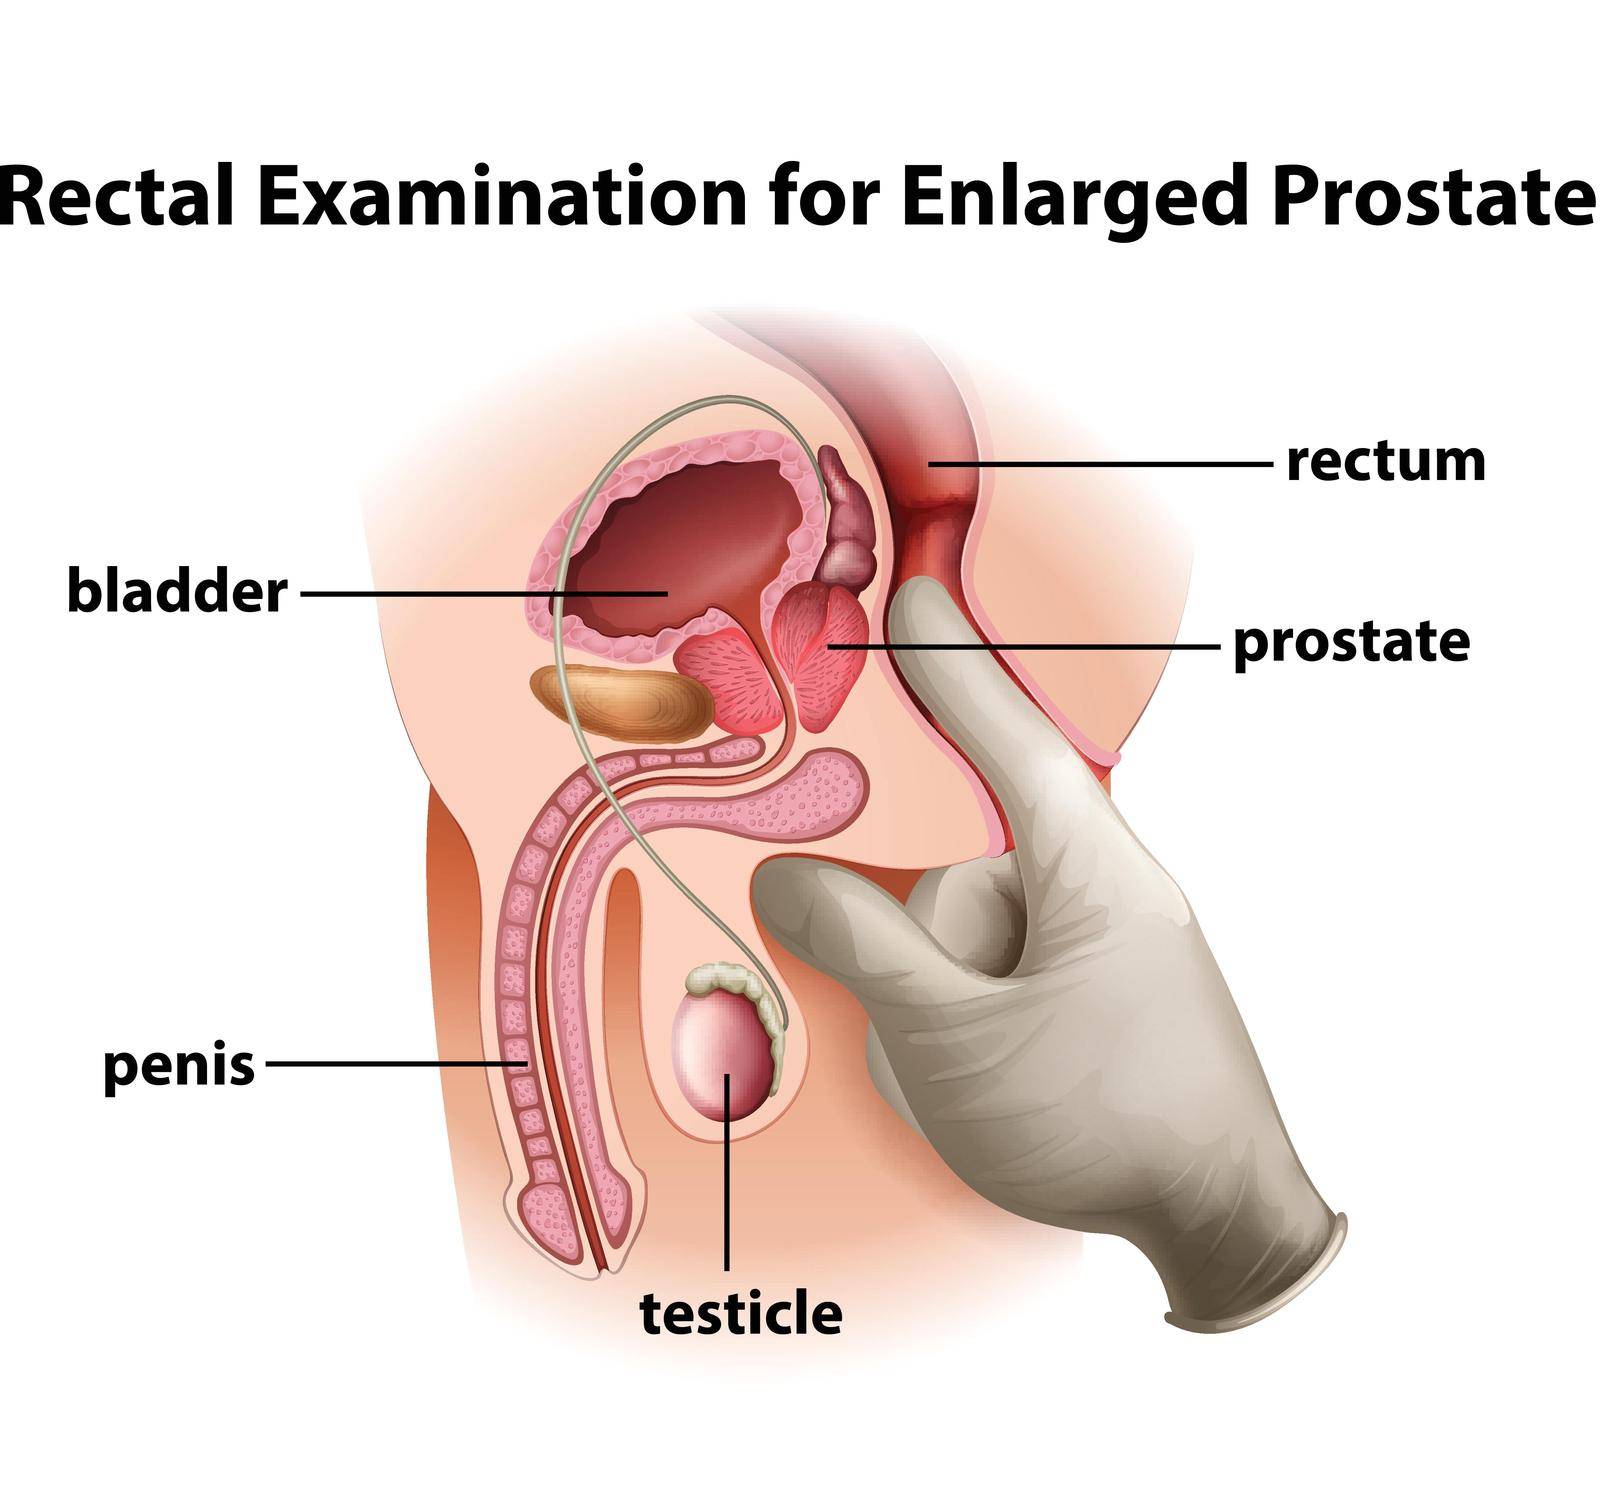 Illustration of a rectal Examination for Enlarged Prostate on a white background